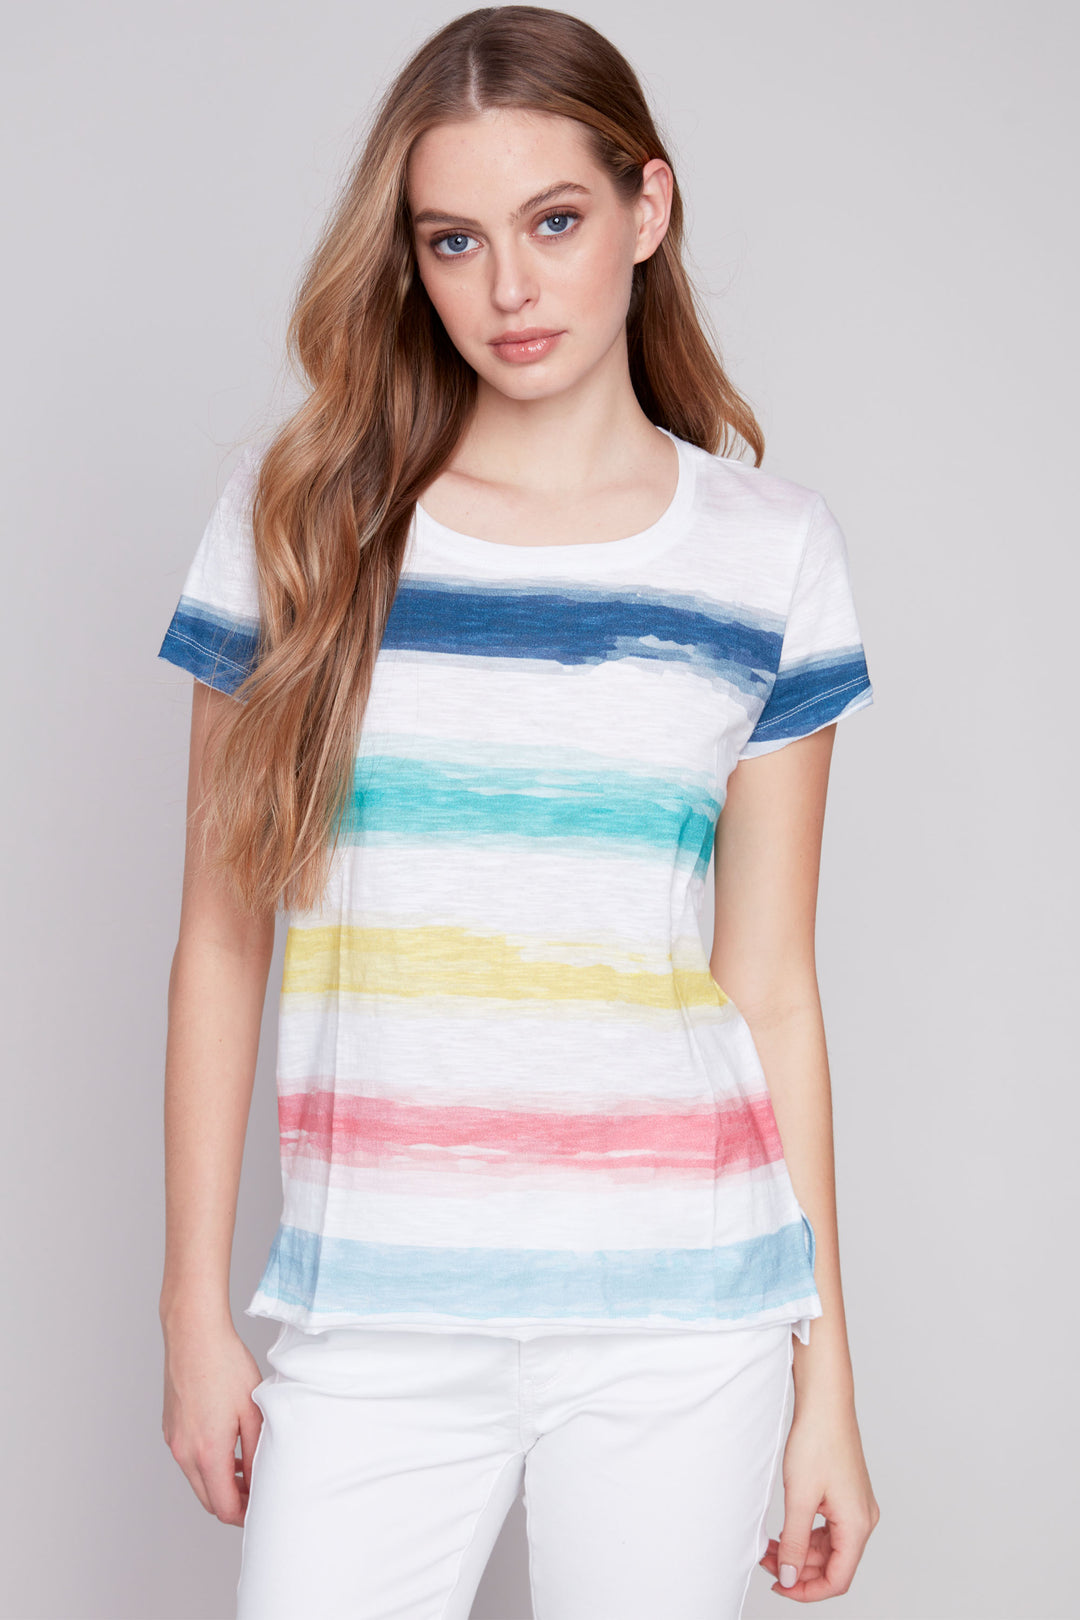 Charlie B Summer 2024 This short sleeve knit top features an eye-catching stripe design pattern, is light, airy and ready for any adventure this season~! 